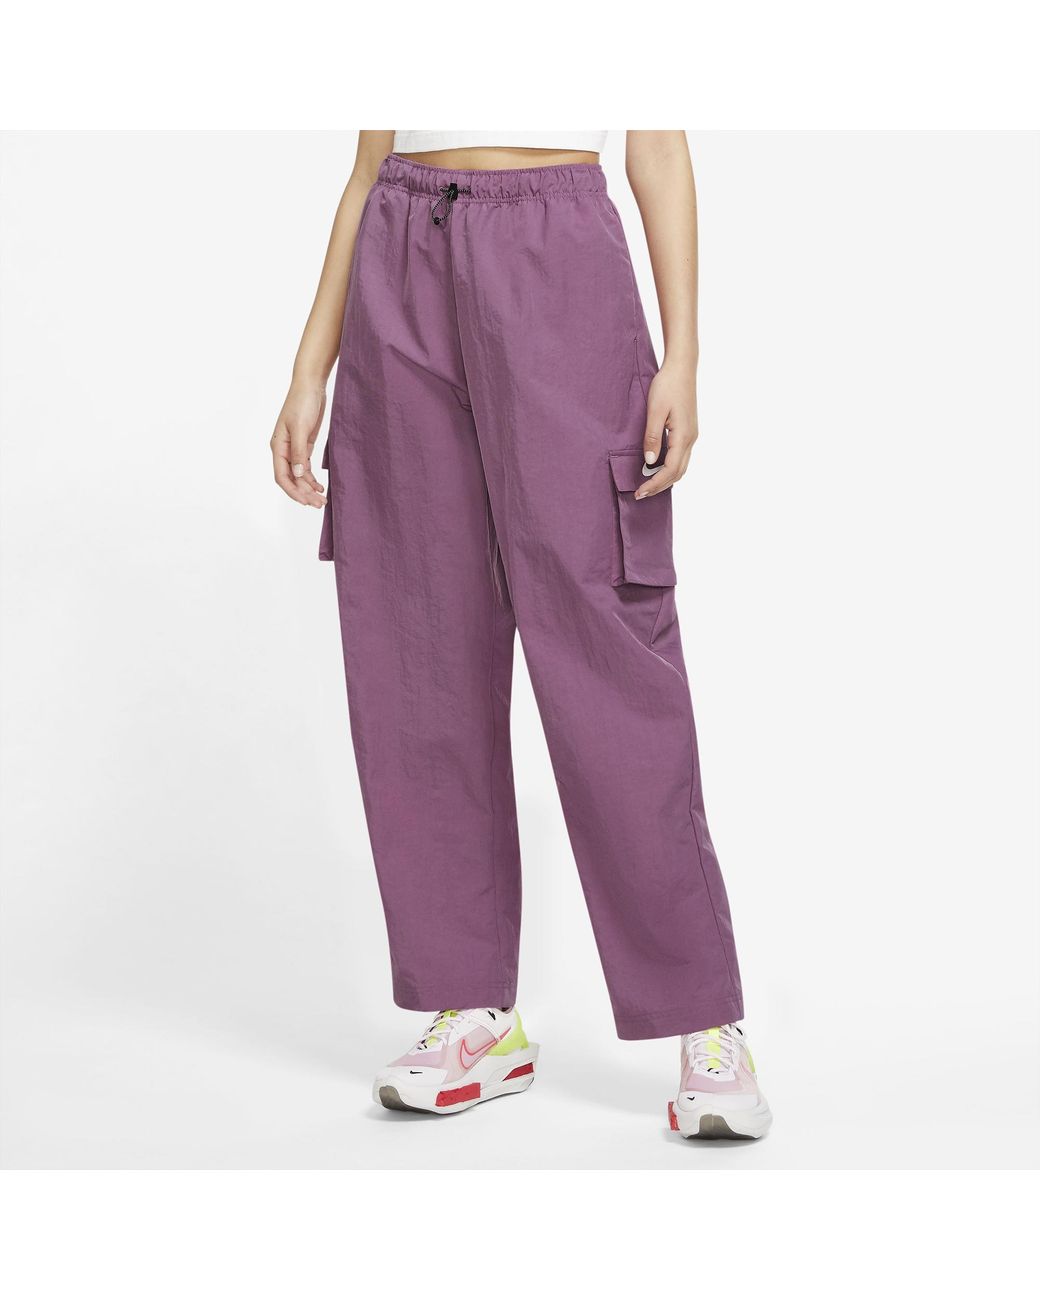 Nike Synthetic Essential Woven Hr Cargo Pants in Maroon/White (Purple ...